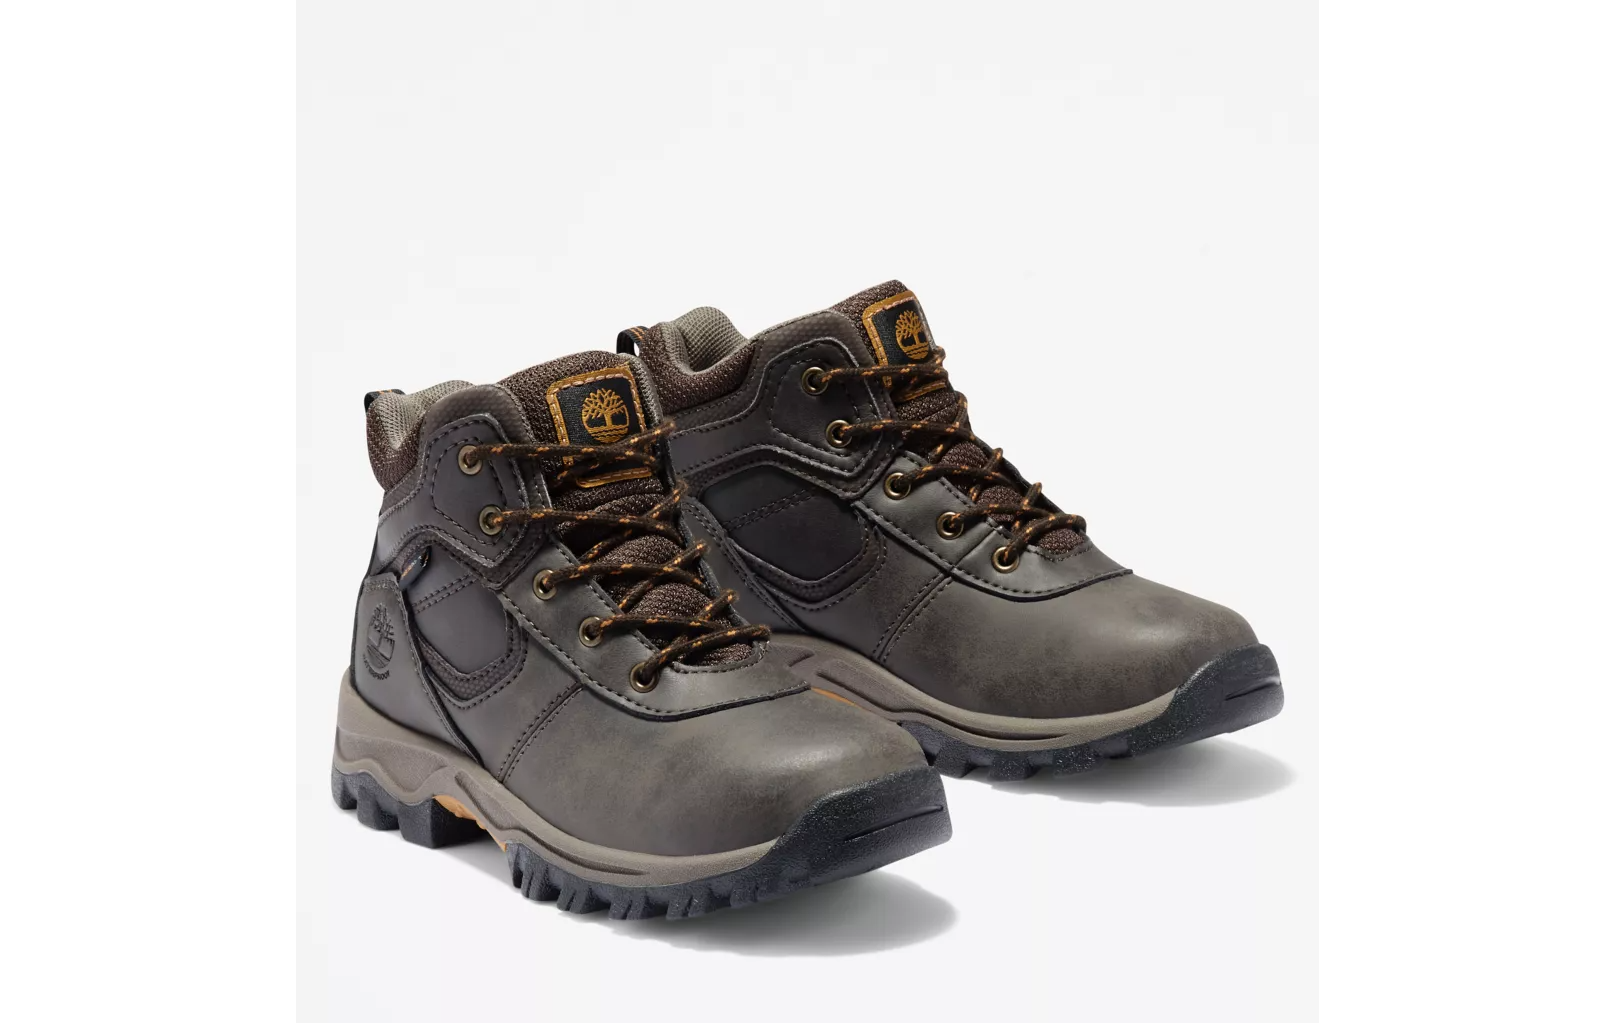 Timberland Youth Mt Maddsen Waterproof Hiking Boots